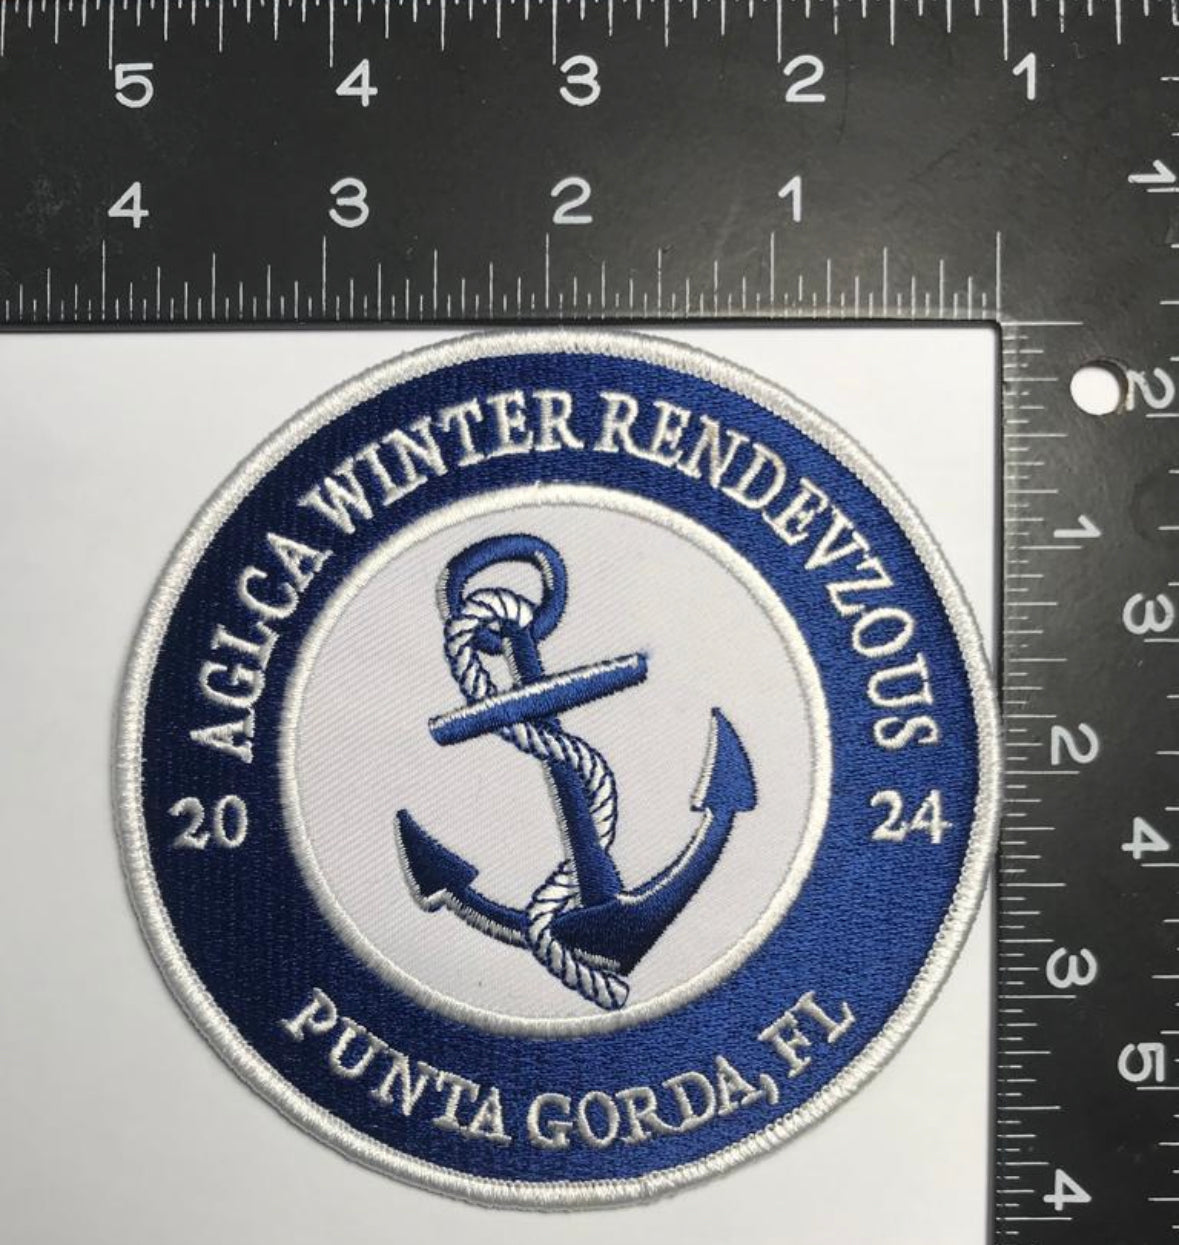 AGLCA Winter Rendezvous Patch